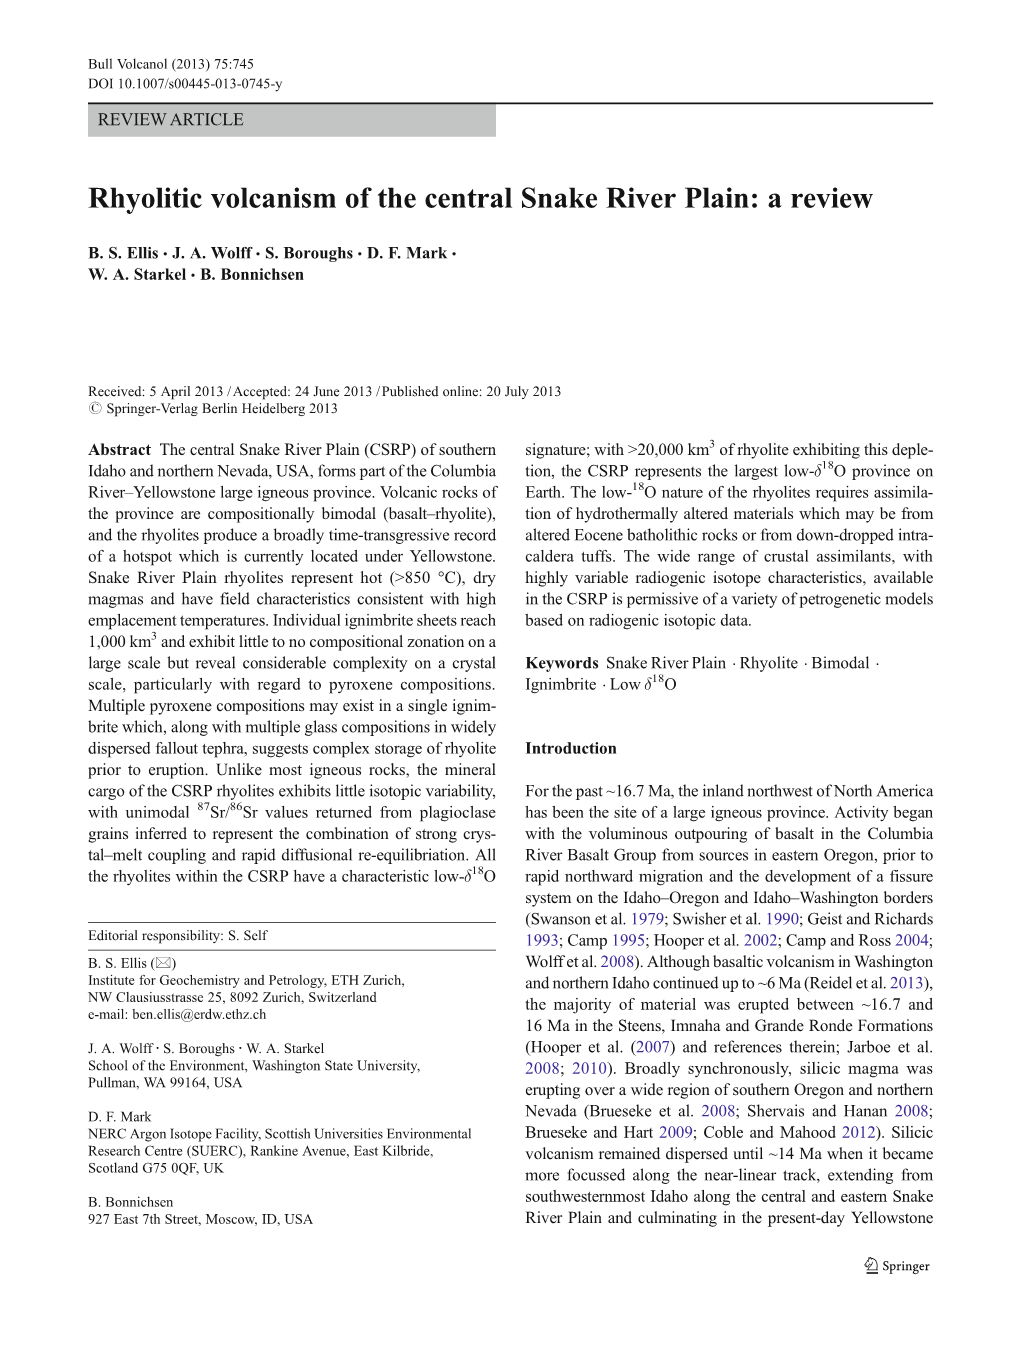 Rhyolitic Volcanism of the Central Snake River Plain: a Review